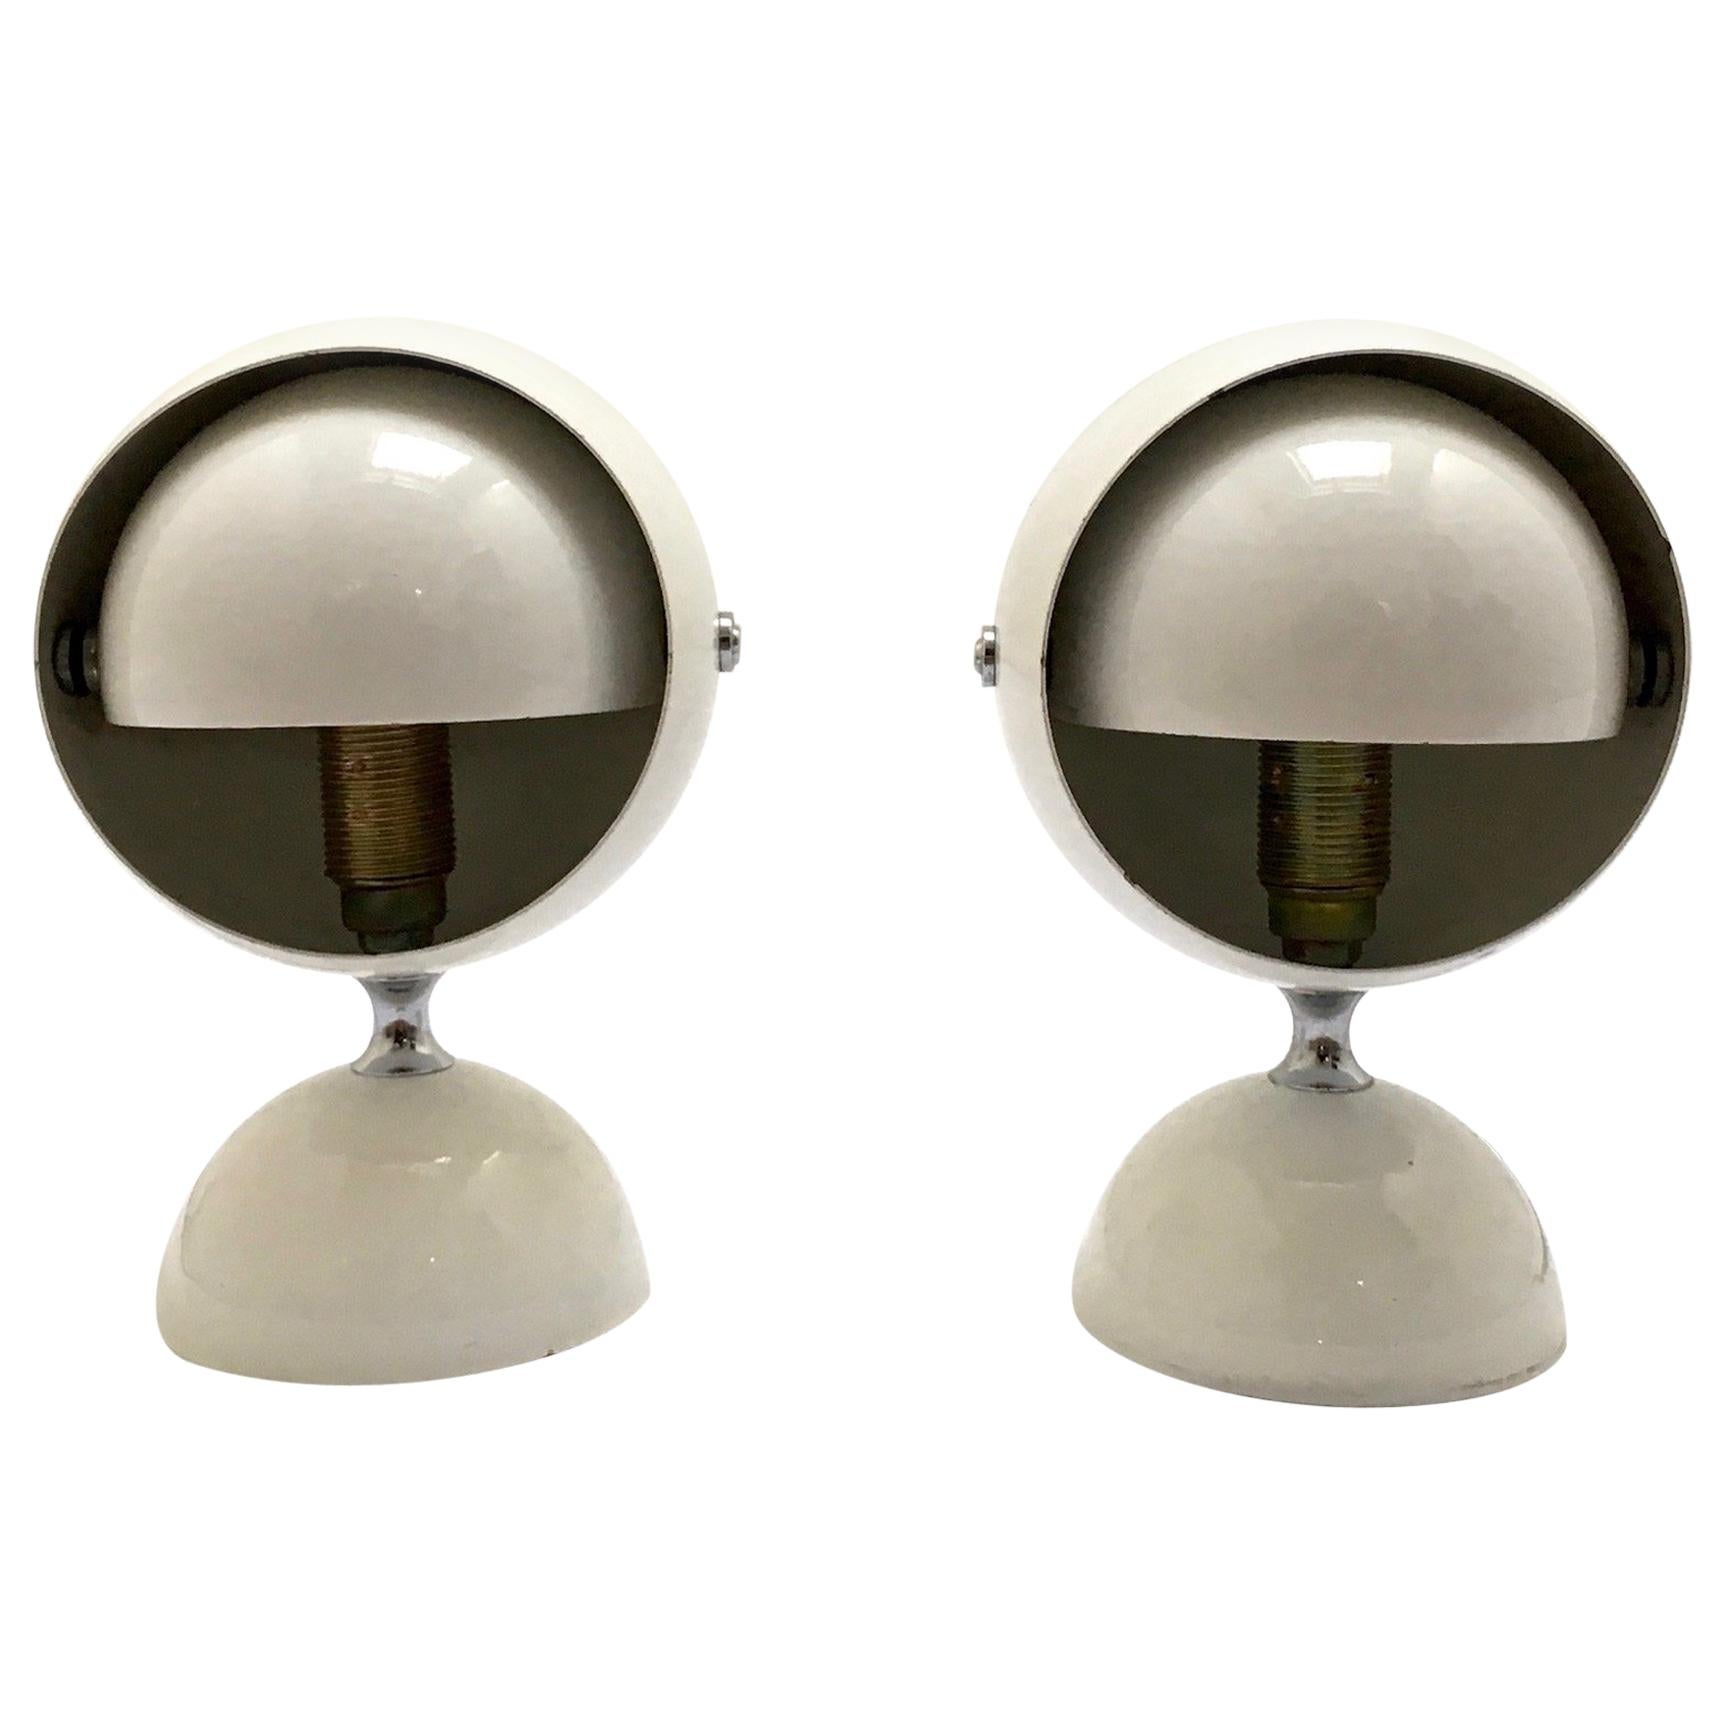 Pair of 1970s Space Age Eye Ball Lamp